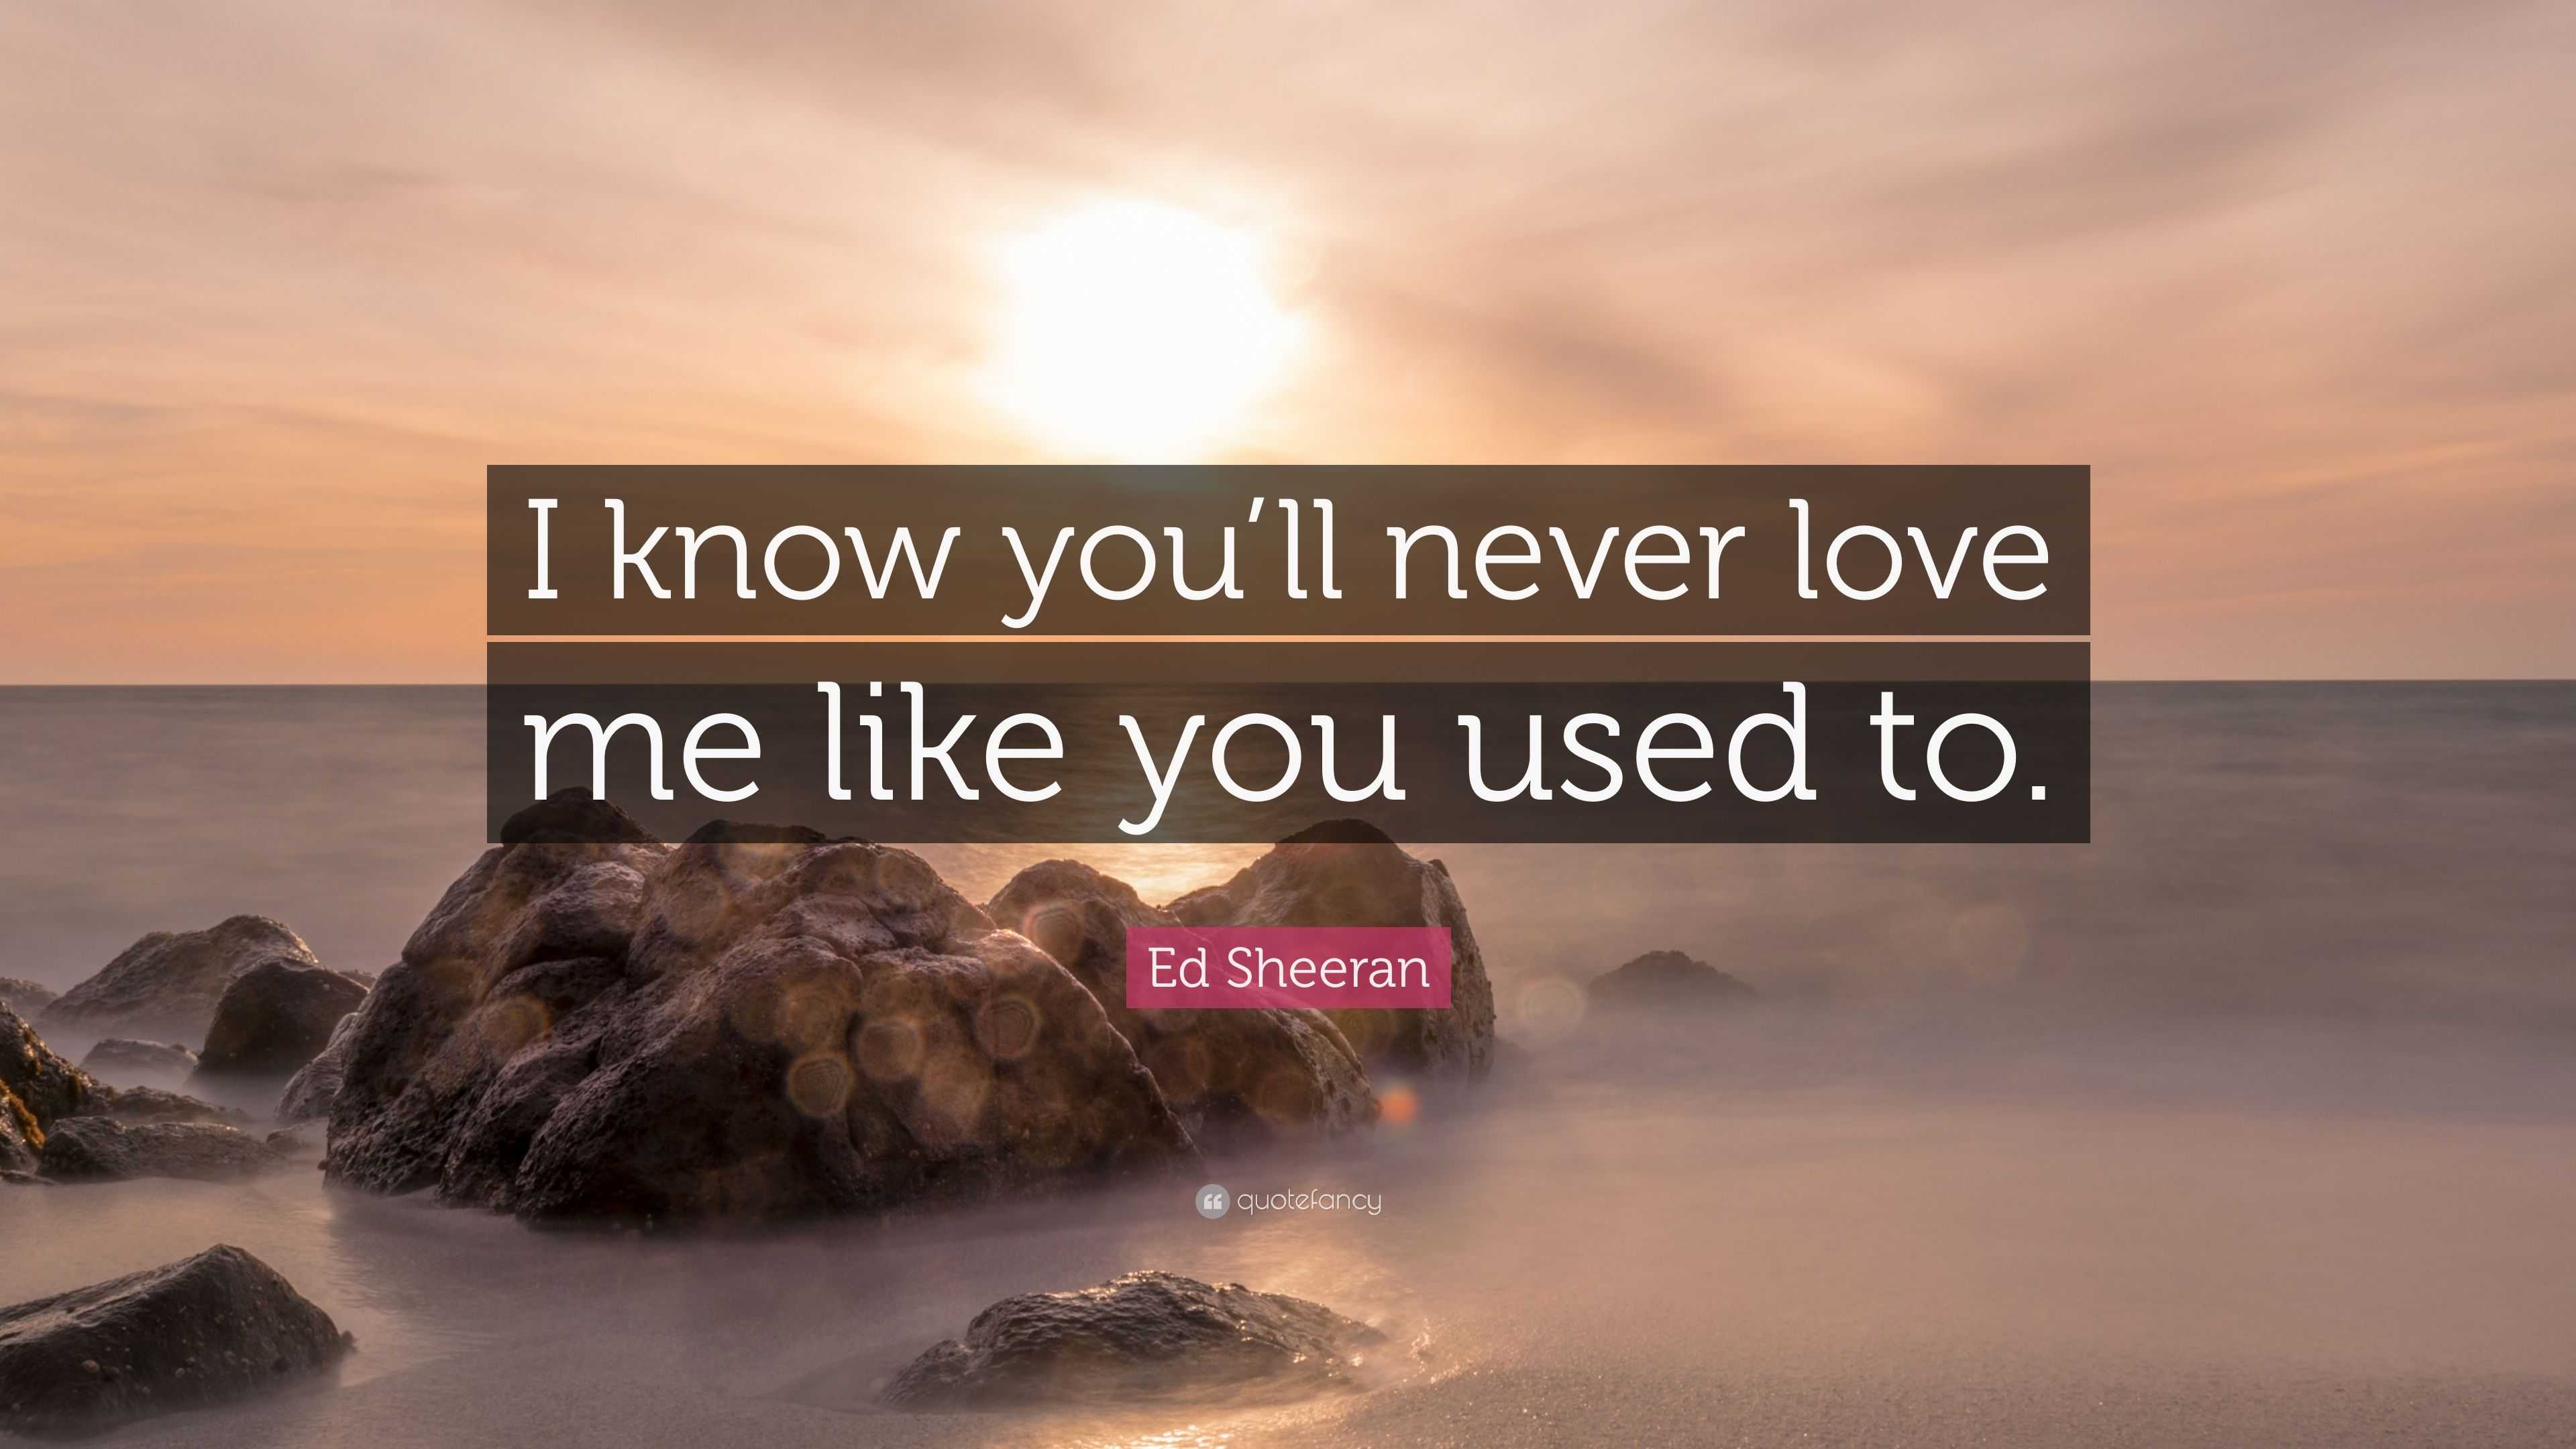 Ed Sheeran Quote “I know you ll never love me like you used